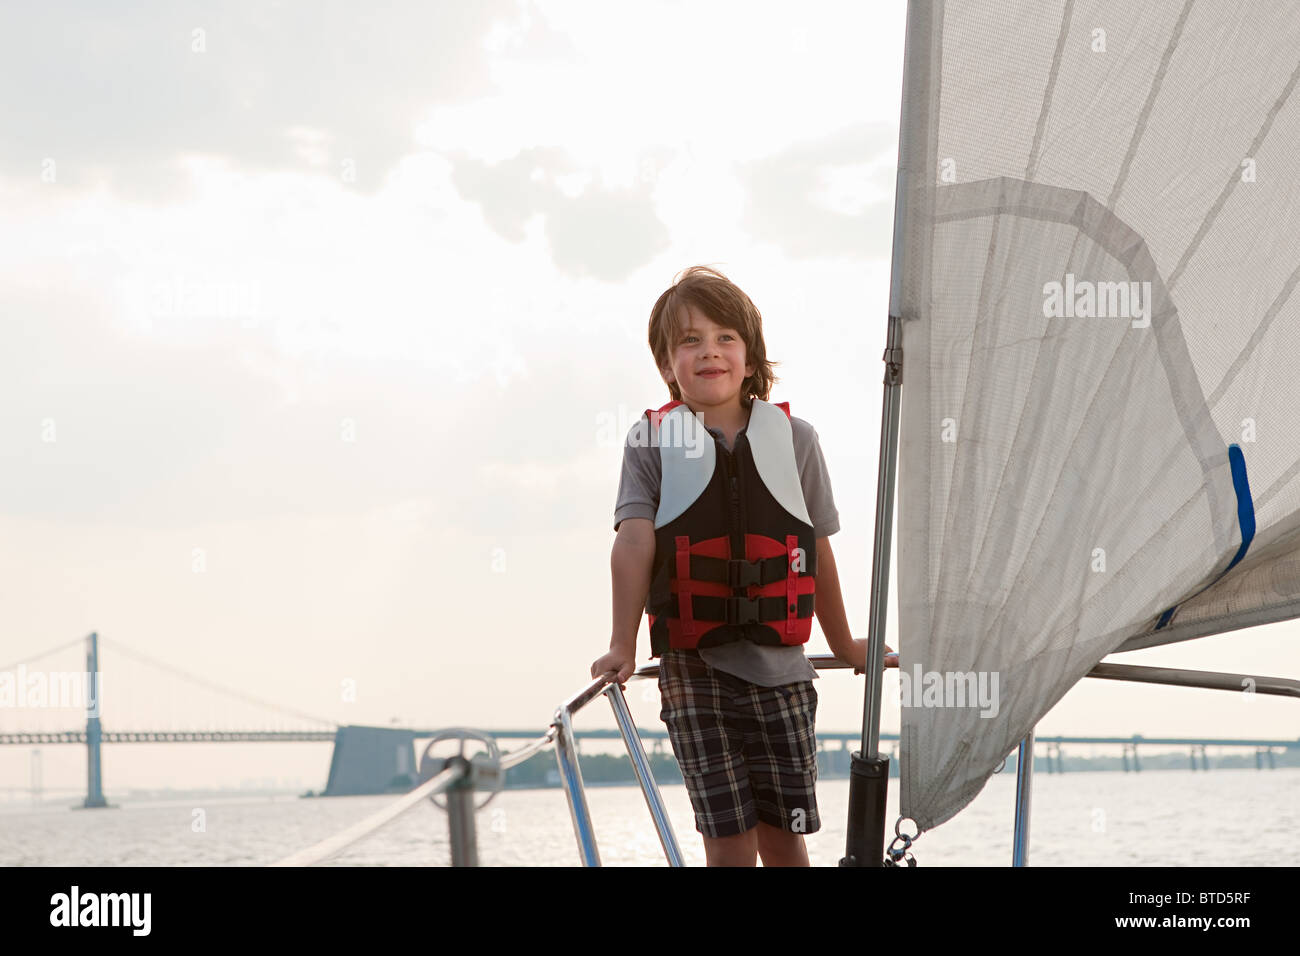 Young boy on board yacht Stock Photo